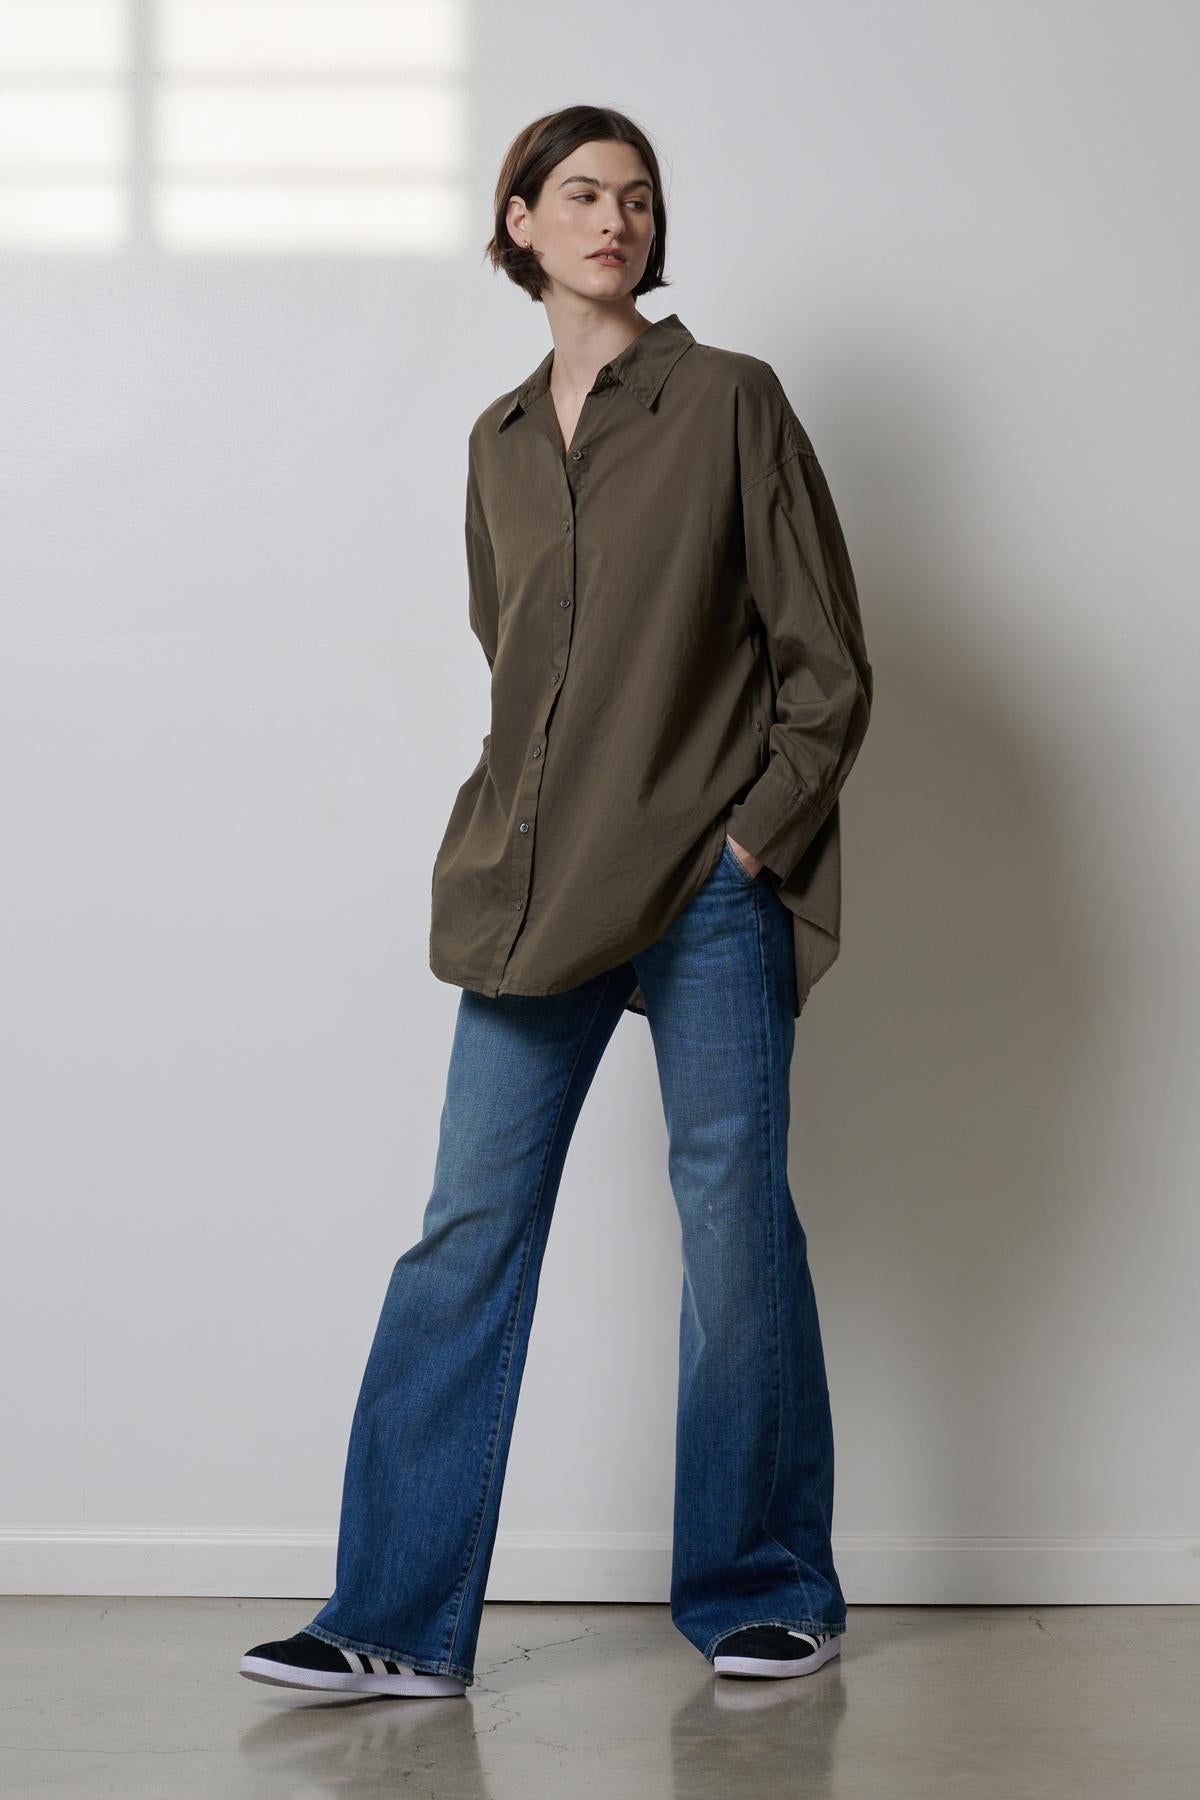 A woman is standing in a room wearing the REDONDO BUTTON-UP SHIRT by Velvet by Jenny Graham and oversized jeans.-35783065731265